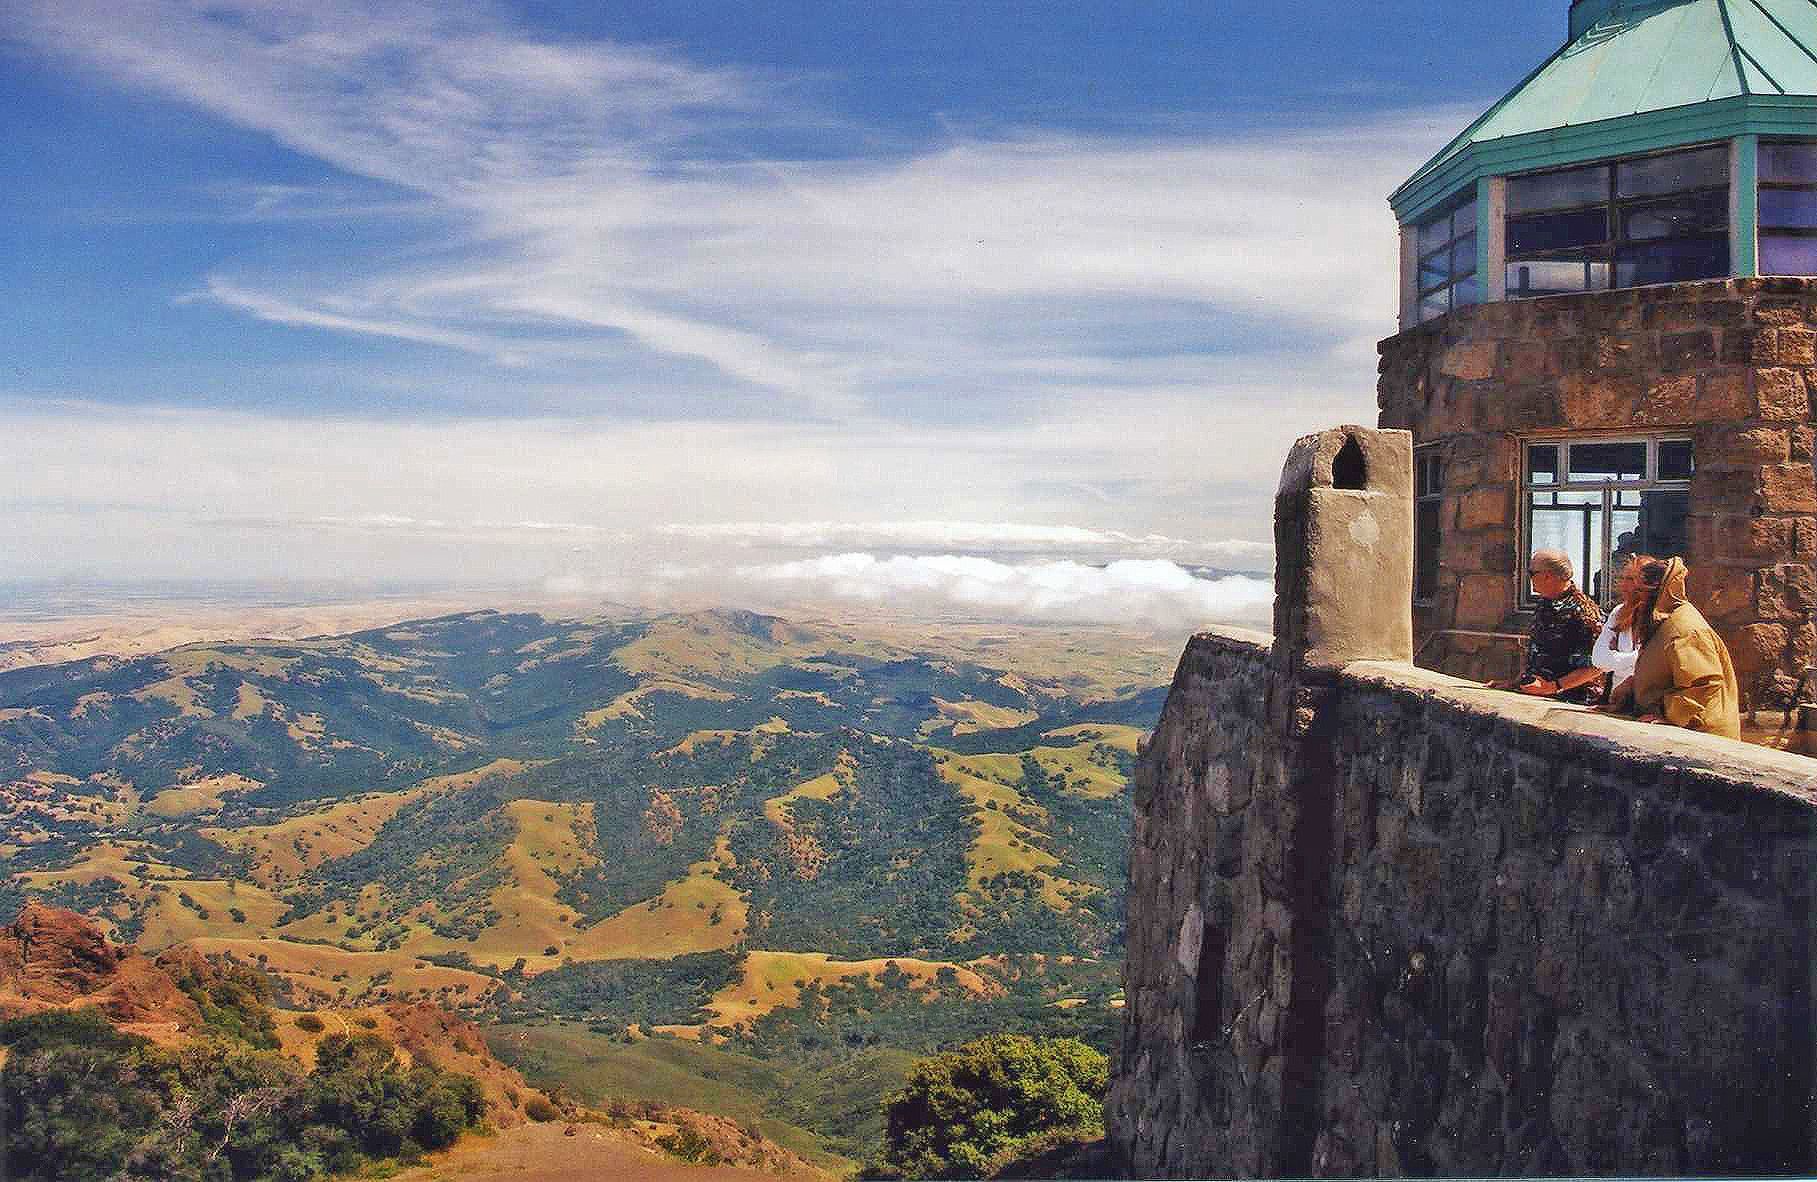 View from Mount Diablo's summit tower in California